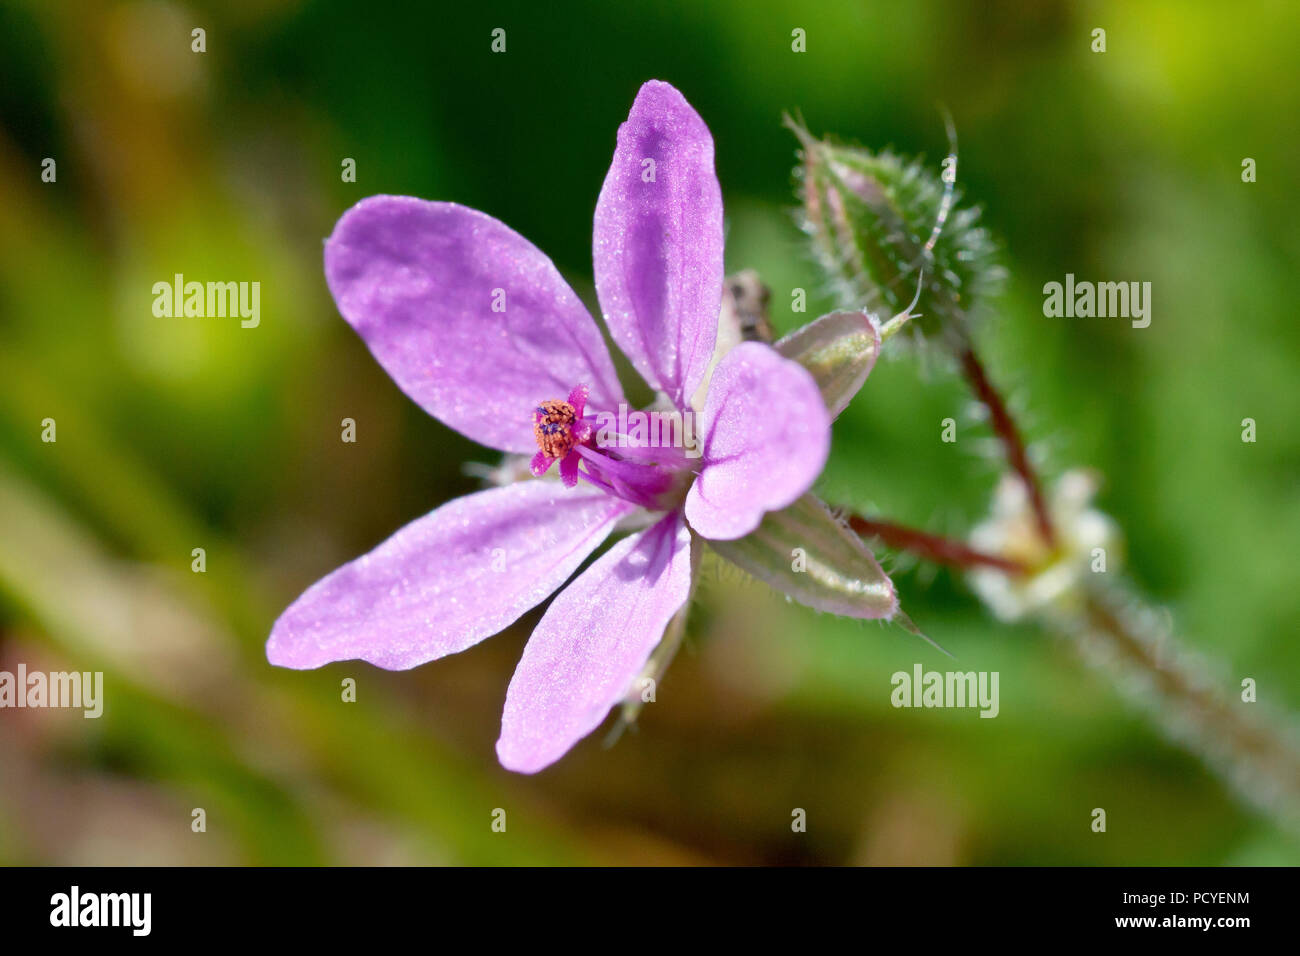 Common Storksbill (erodium cicutarium), close up of a single flower with bud. Stock Photo